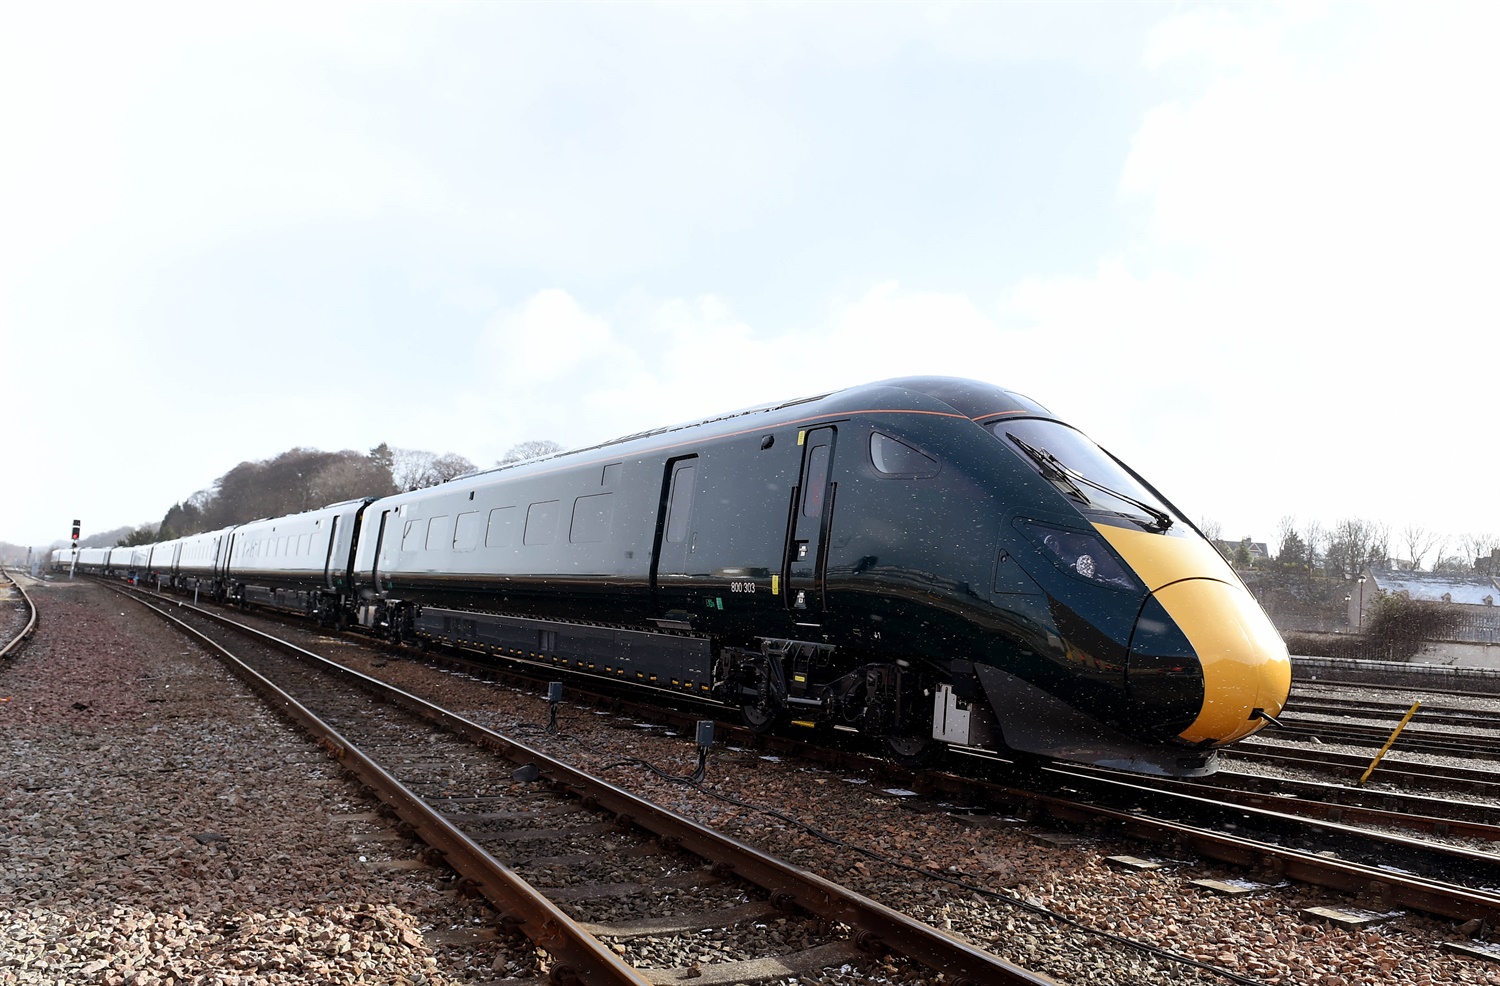 New Intercity Express train reaches Inverness depot for testing